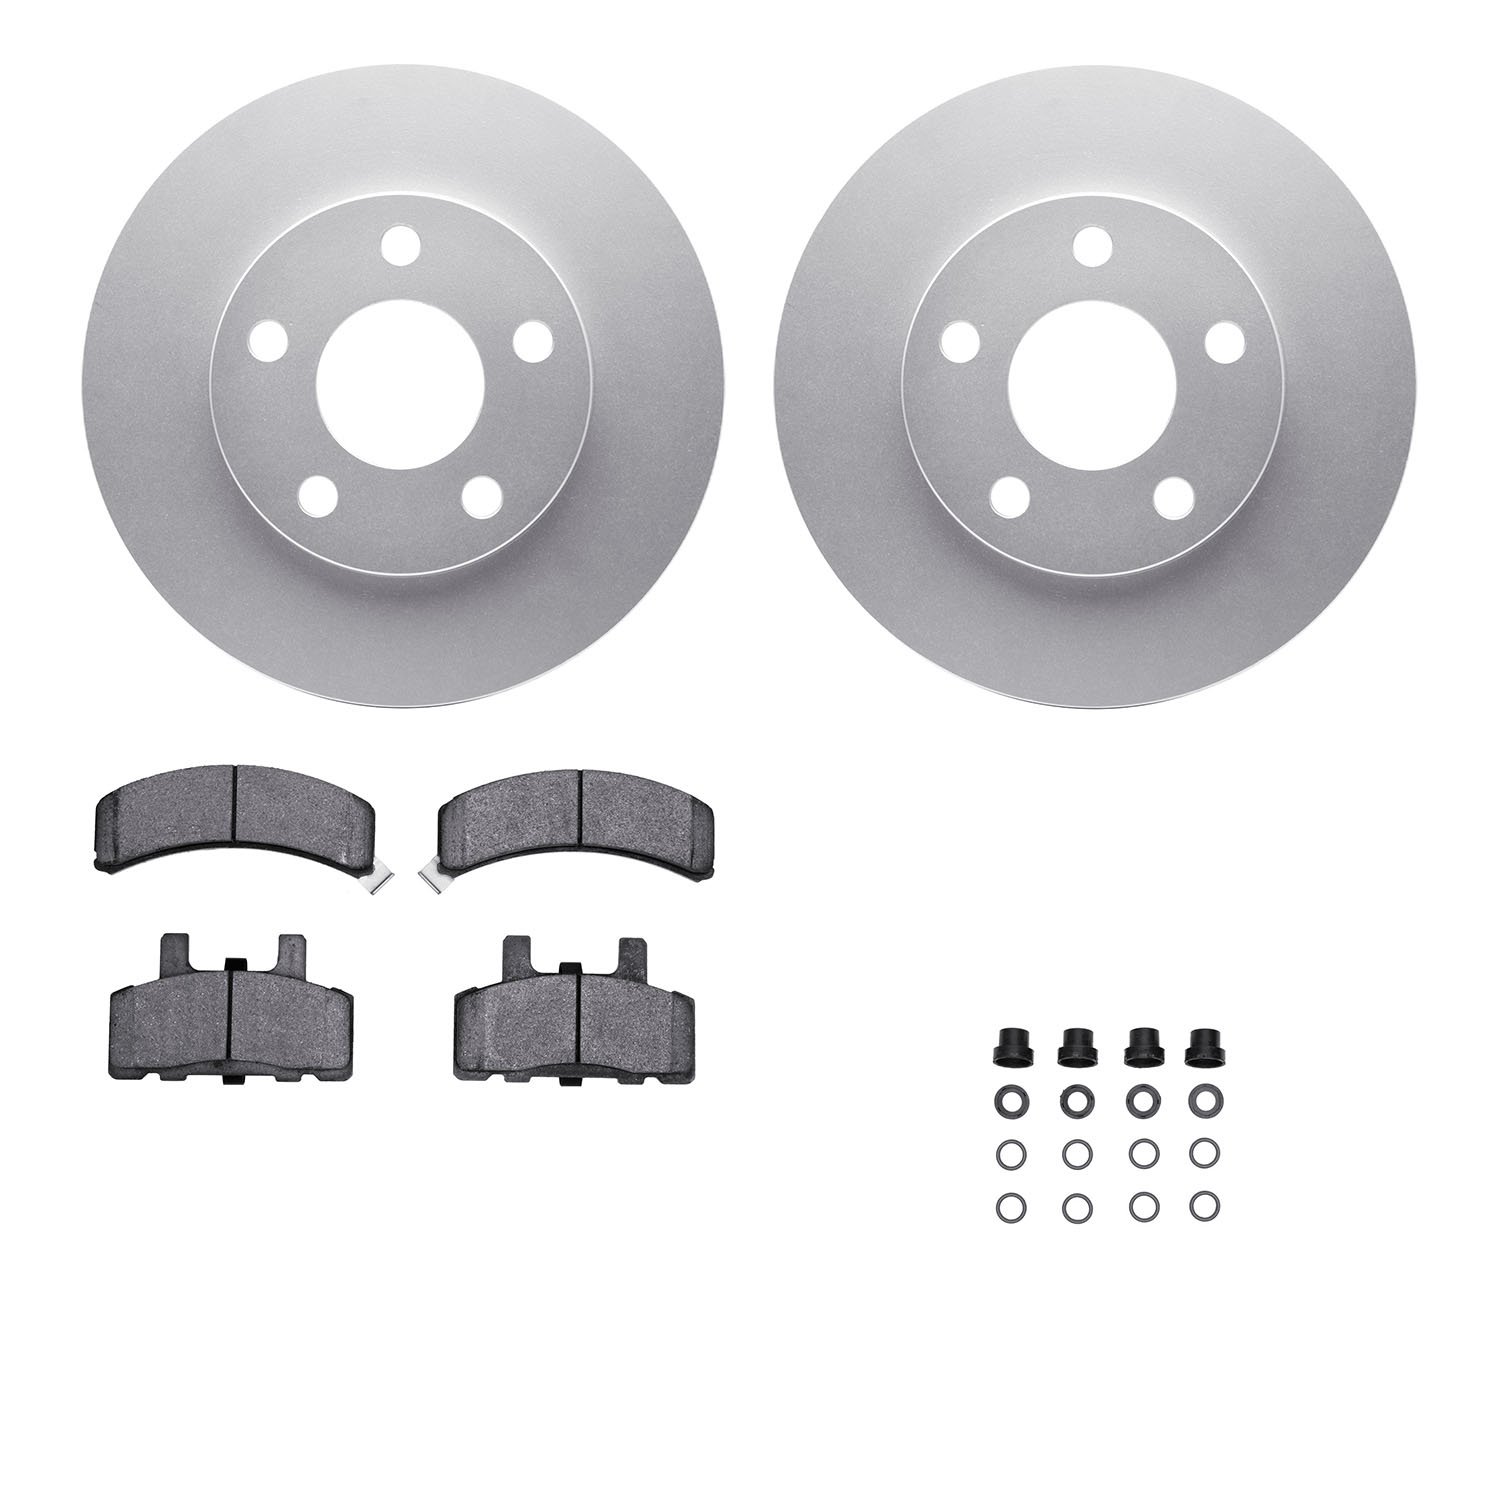 4412-47002 Geospec Brake Rotors with Ultimate-Duty Brake Pads & Hardware, 1990-1993 GM, Position: Front